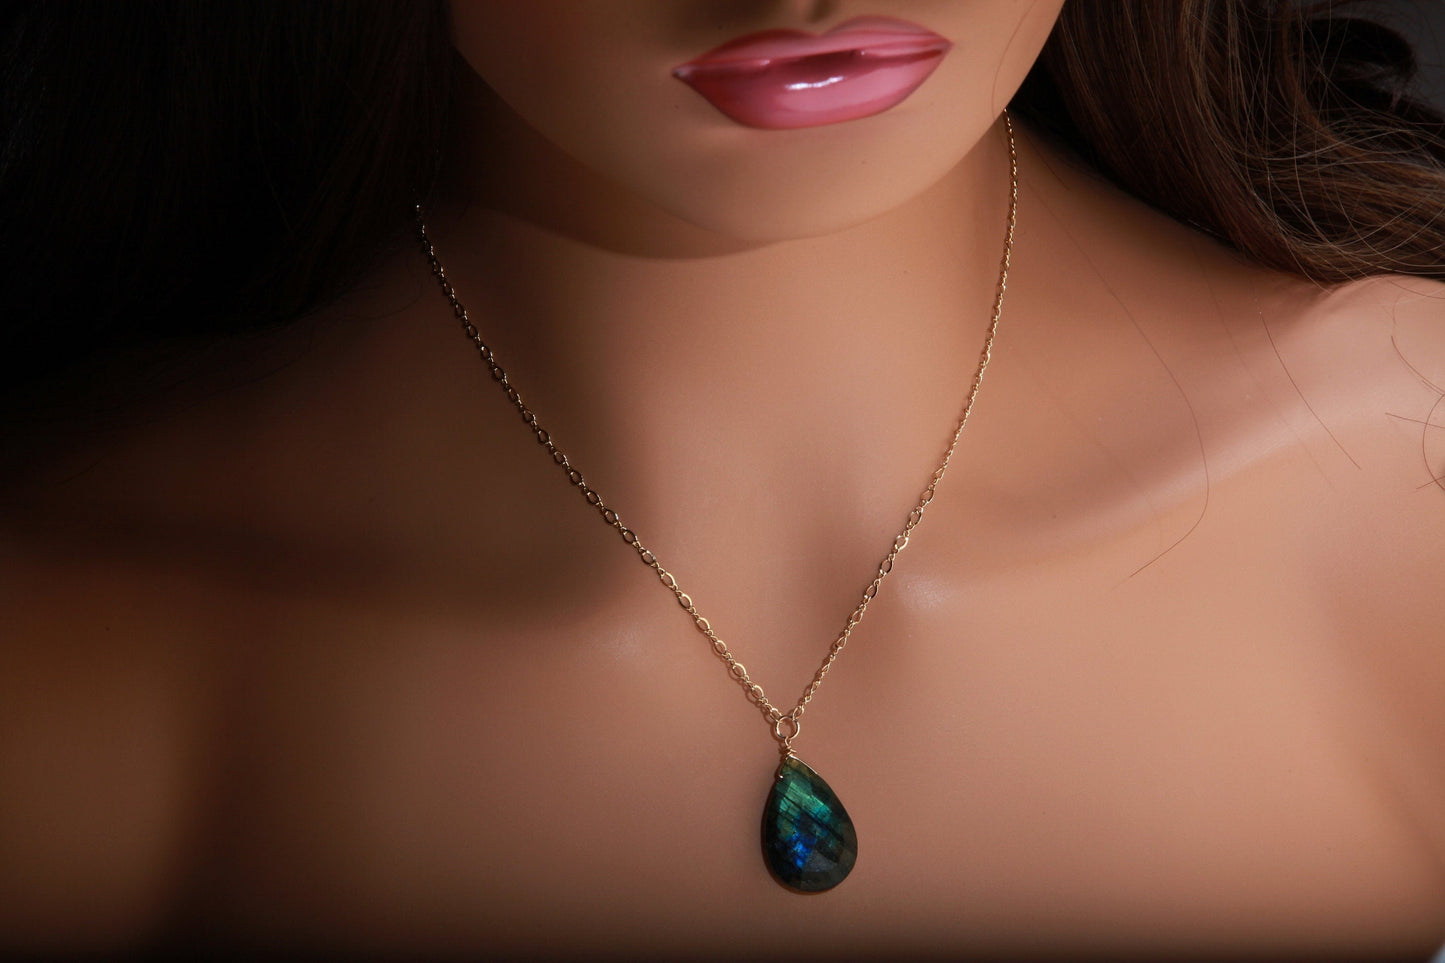 Natural Labradorite Blue Green Faceted 15x28-17x25mm Teardrop Steady Figure 8 925 Sterling Silver or 14K Gold Filled Necklace, Gift For Her